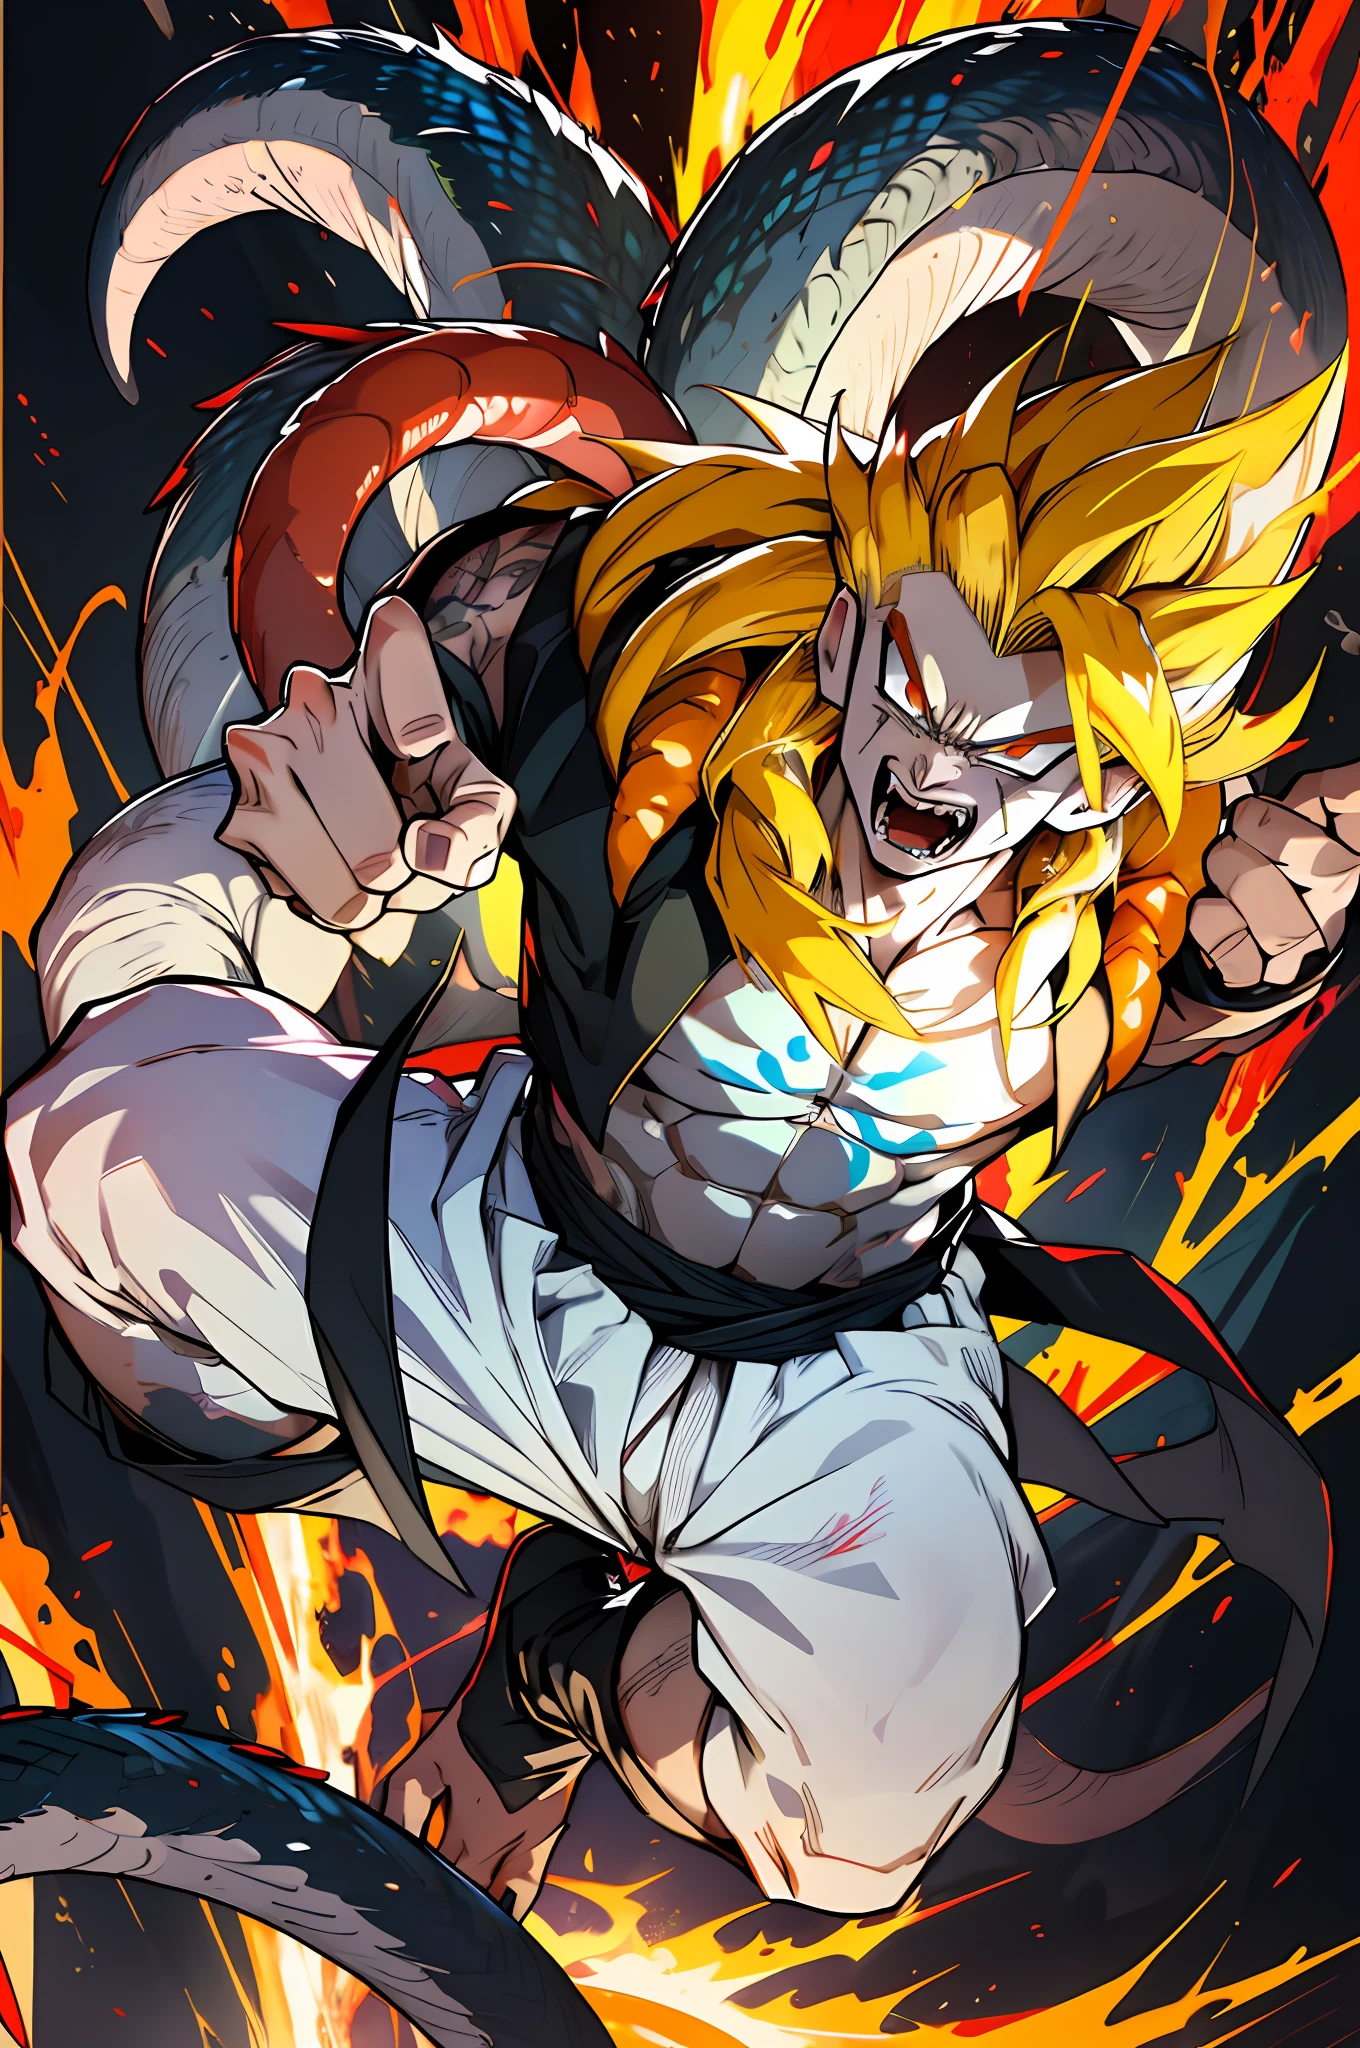 Ultra Supersayajin, long hair yellow color degraê diamond, and red eyes with black outlines painted around the eyes, white clothing with dragon tatoon print, open mouth screaming, fighting, much fury against enemy, scenery in heaven and earth destroying everything